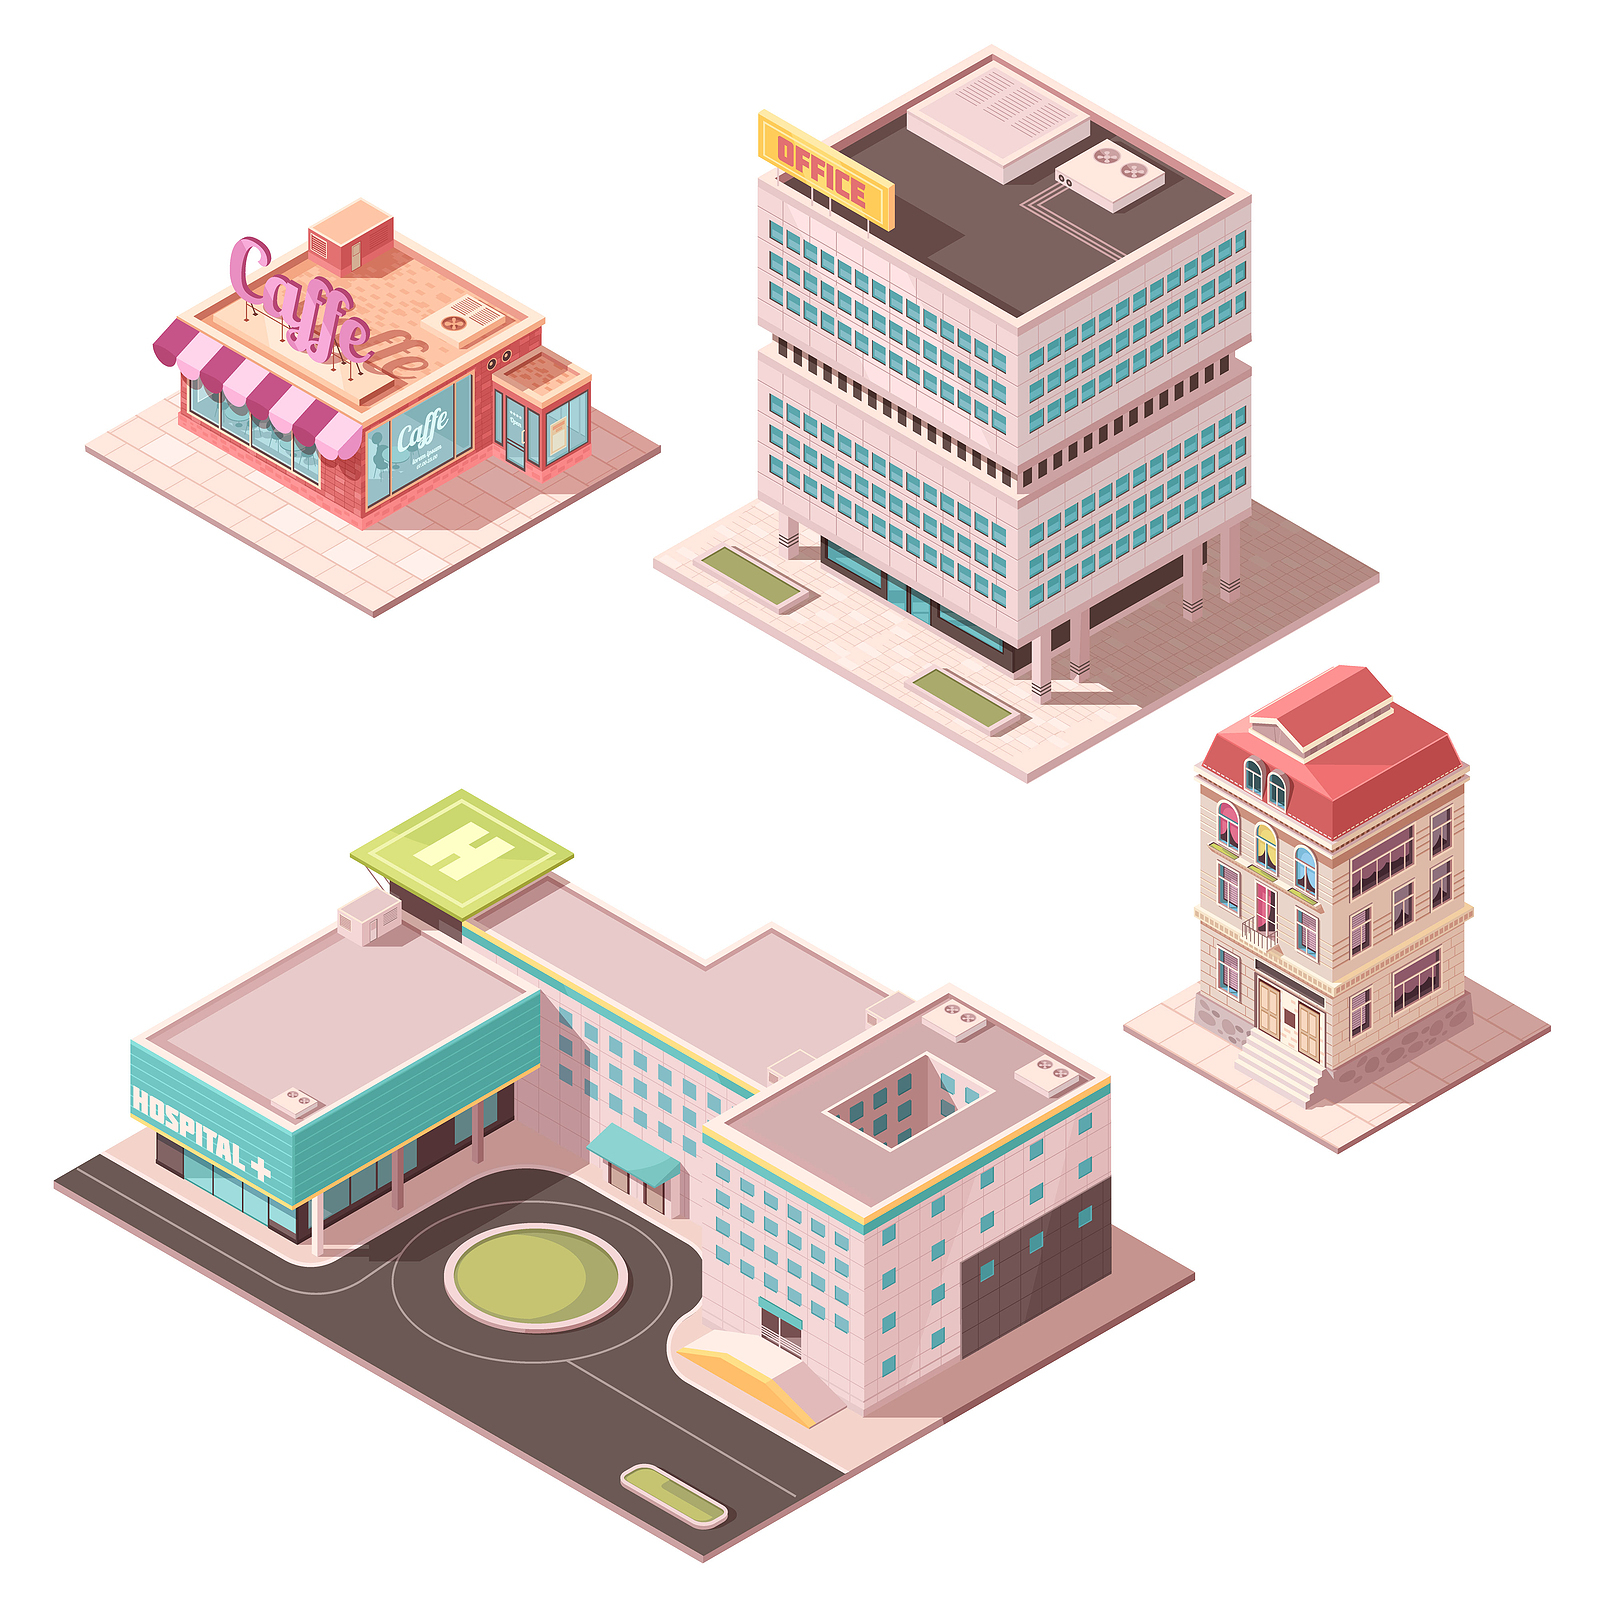 Pastel isometric drawings of city buildings including an office, a cafe, a hospital and a residential block